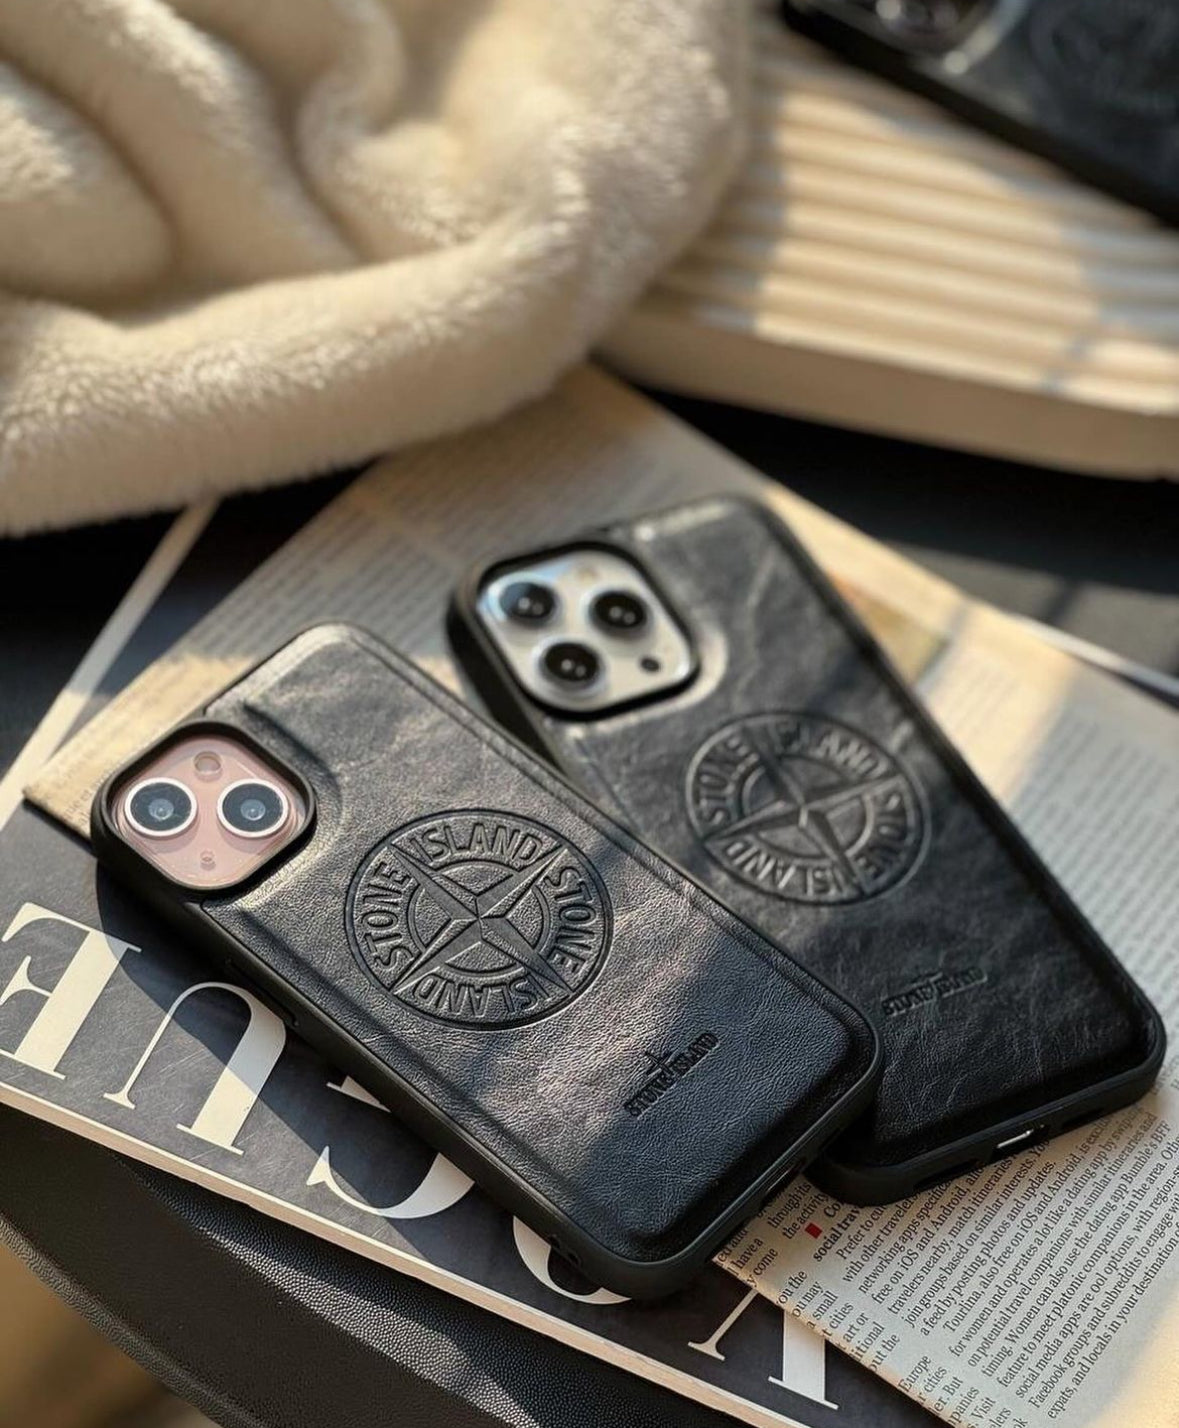 ADW SHOPCover Stone Island for Iphone - Premium Cover Stone Island for Iphone from ADW SHOP - Just €24.40! Shop now at ADW SHOP24.40cover iphone in saldo, cover per IPhone economica stone island, Stone Island cover  for Iphone, Stone Island cover per IPhoneADW SHOPCover Stone Island for IphoneCover Stone Island for IphoneCover Stone Island for Iphone